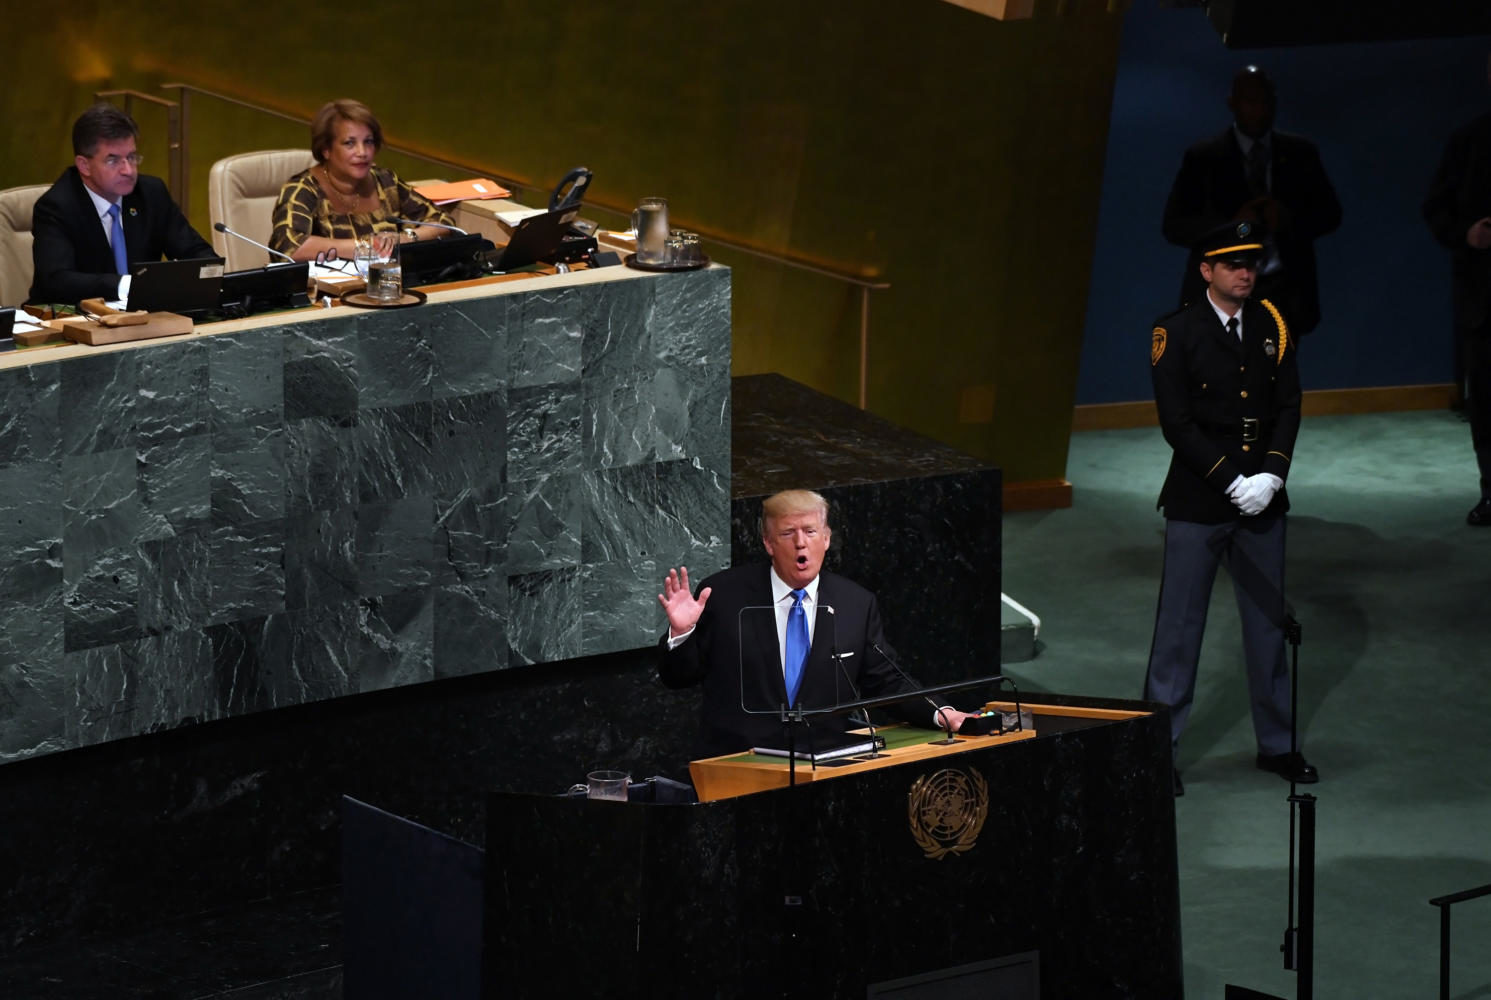 President Donald Trump addresses world leaders at the UN General Assembly in New York on Sept. 19, 2017. (Olivier Douliery/Abaca Press/TNS)